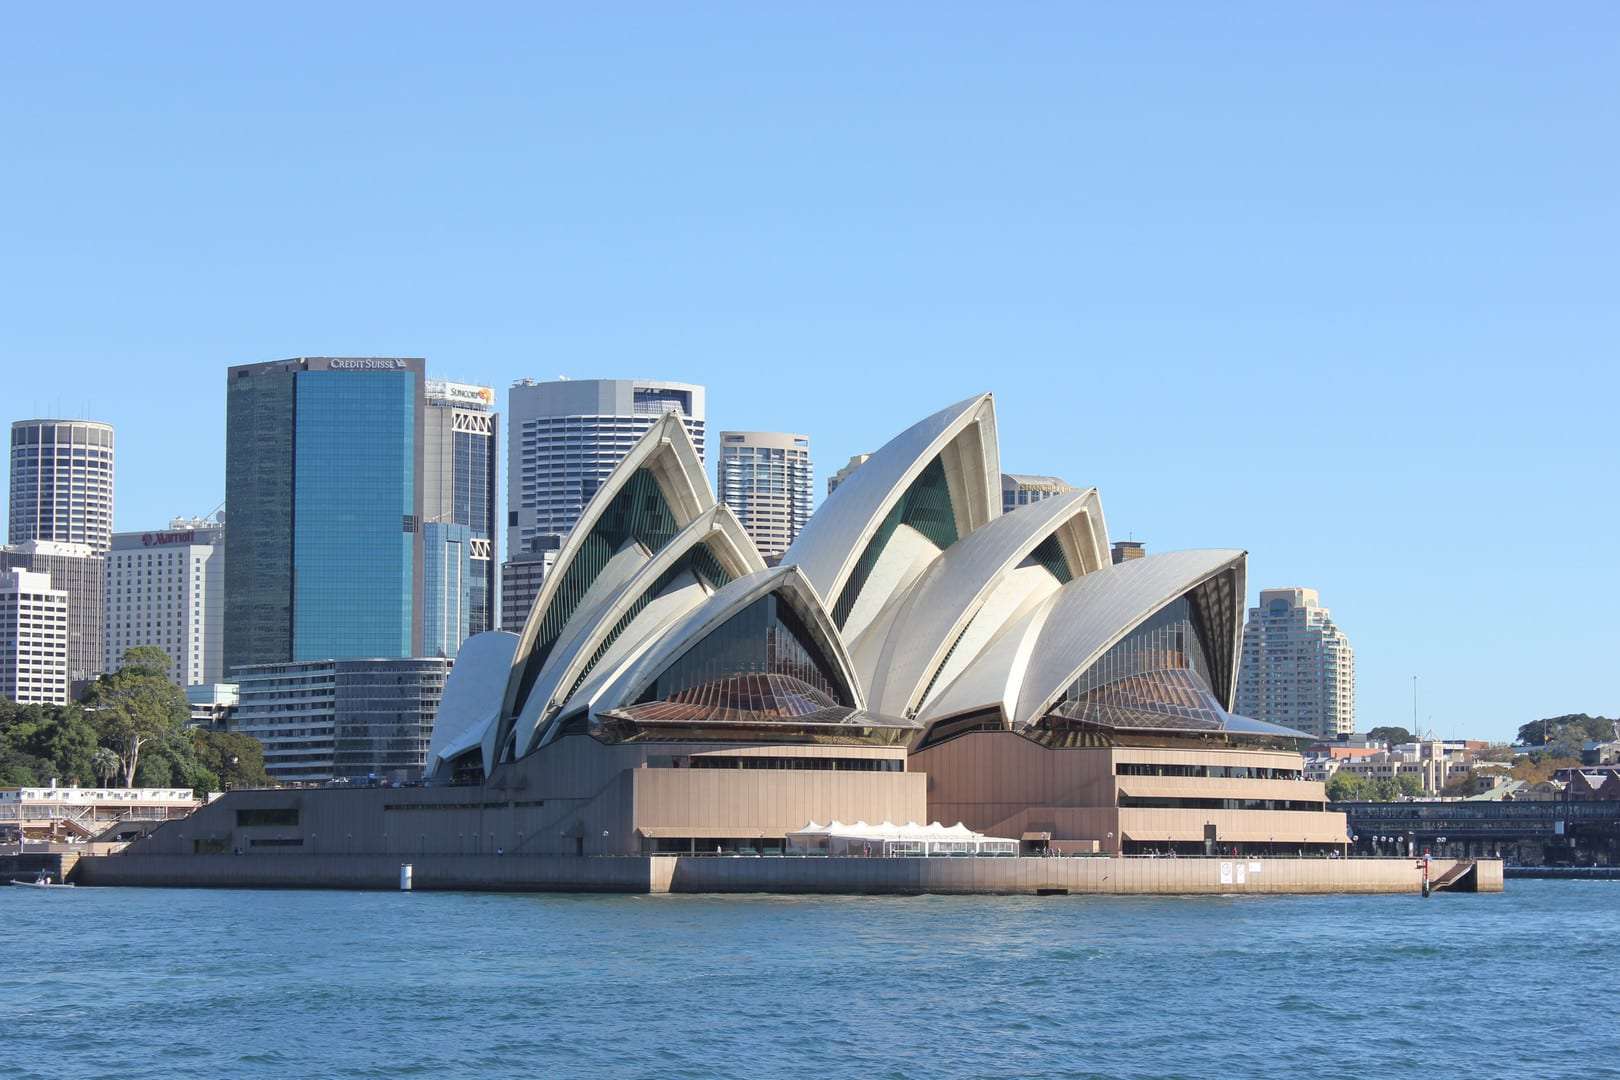 Sydney Opera House event ticket booking process